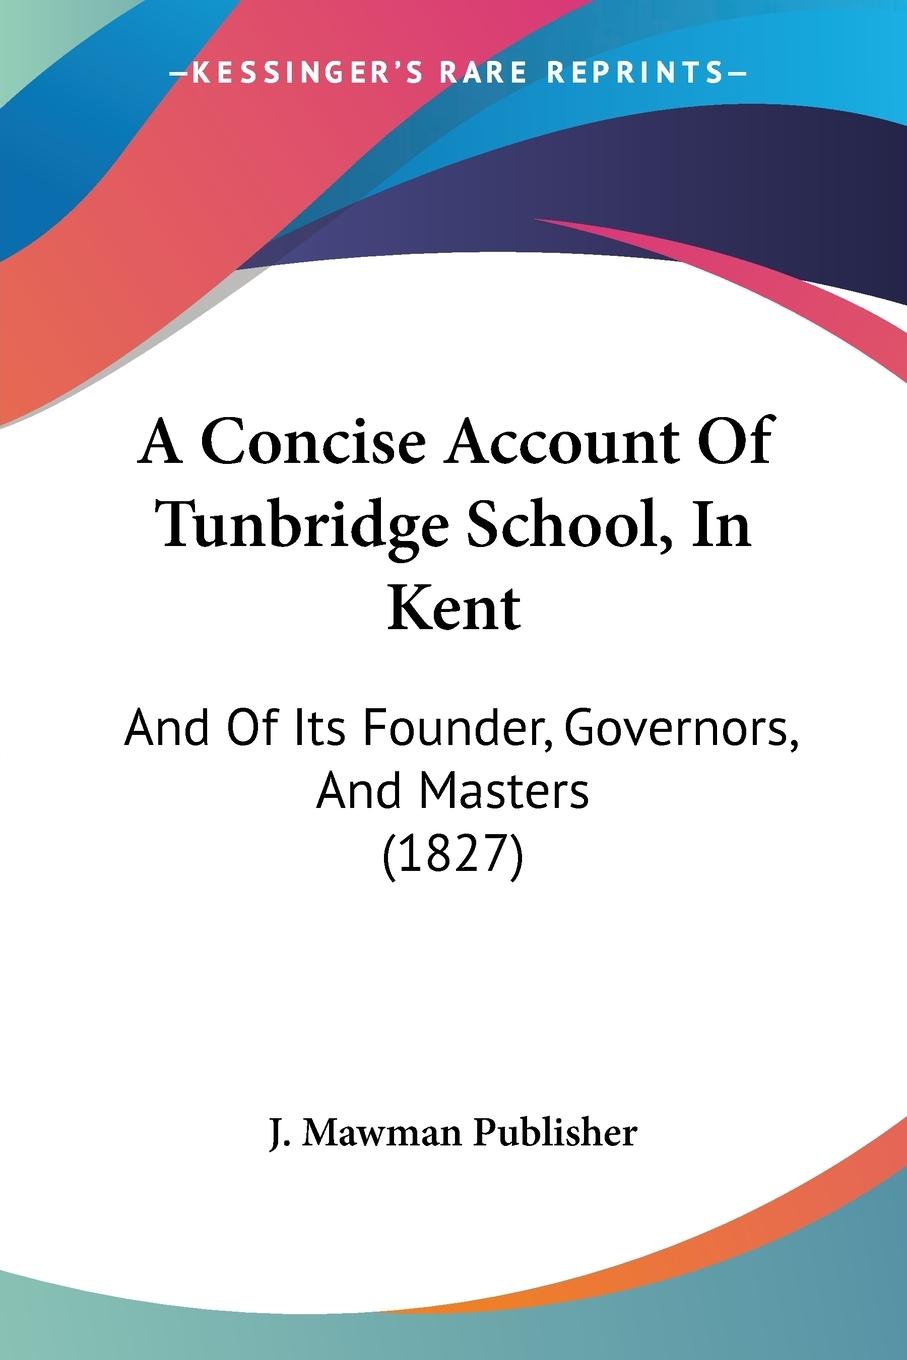 A Concise Account Of Tunbridge School, In Kent - J. Mawman Publisher